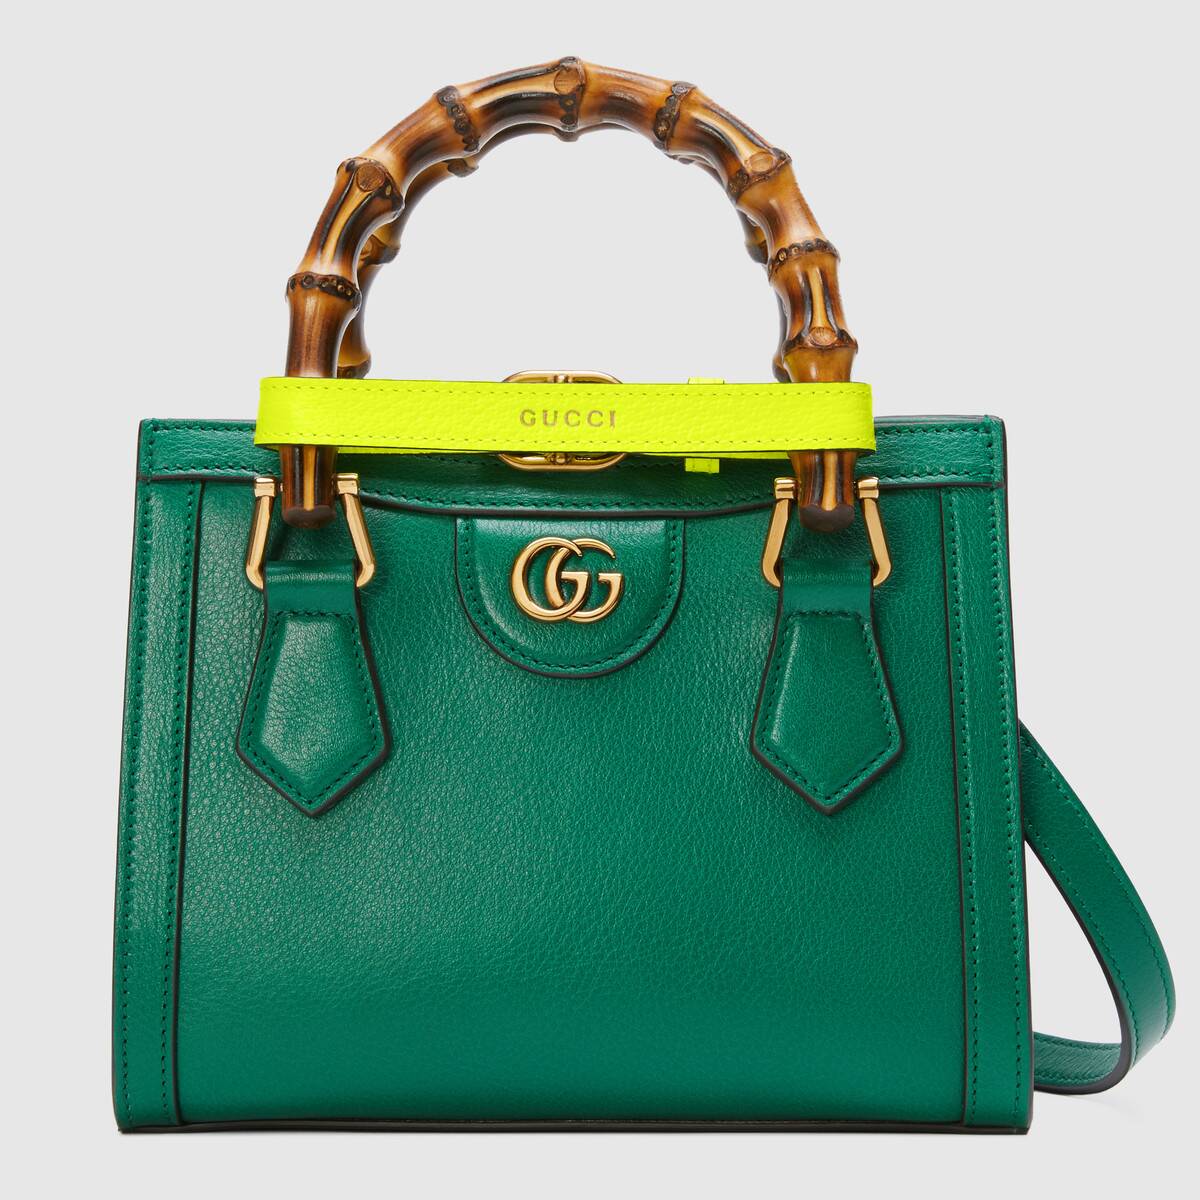 Gucci Recreates Iconic ‘Princess Diana’ Bag To Commemorate Her 60th ...